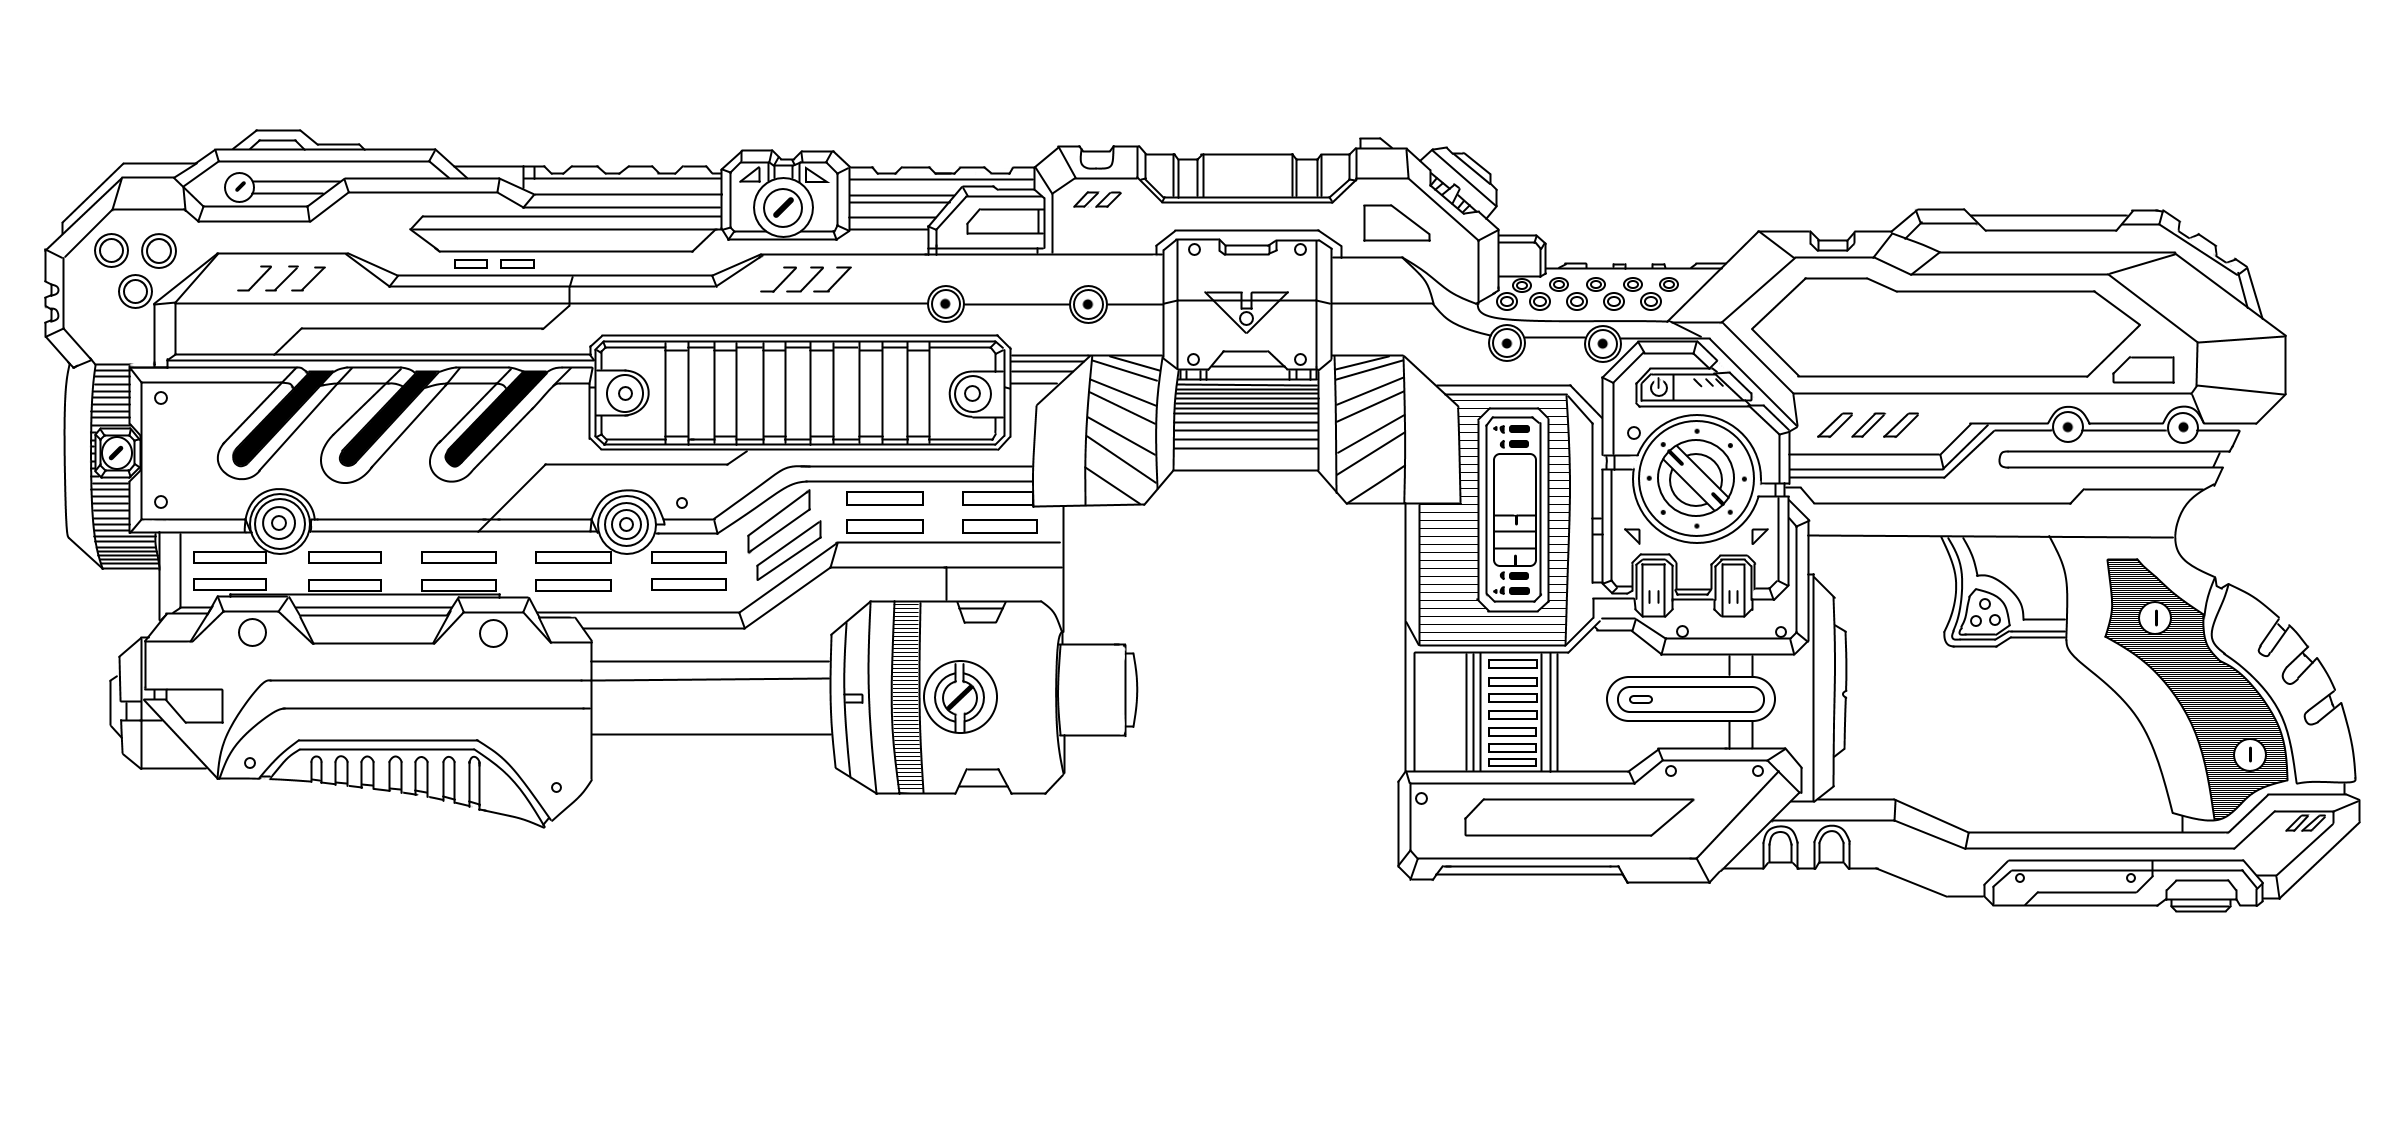 Turbo advance coloring book page rnerf